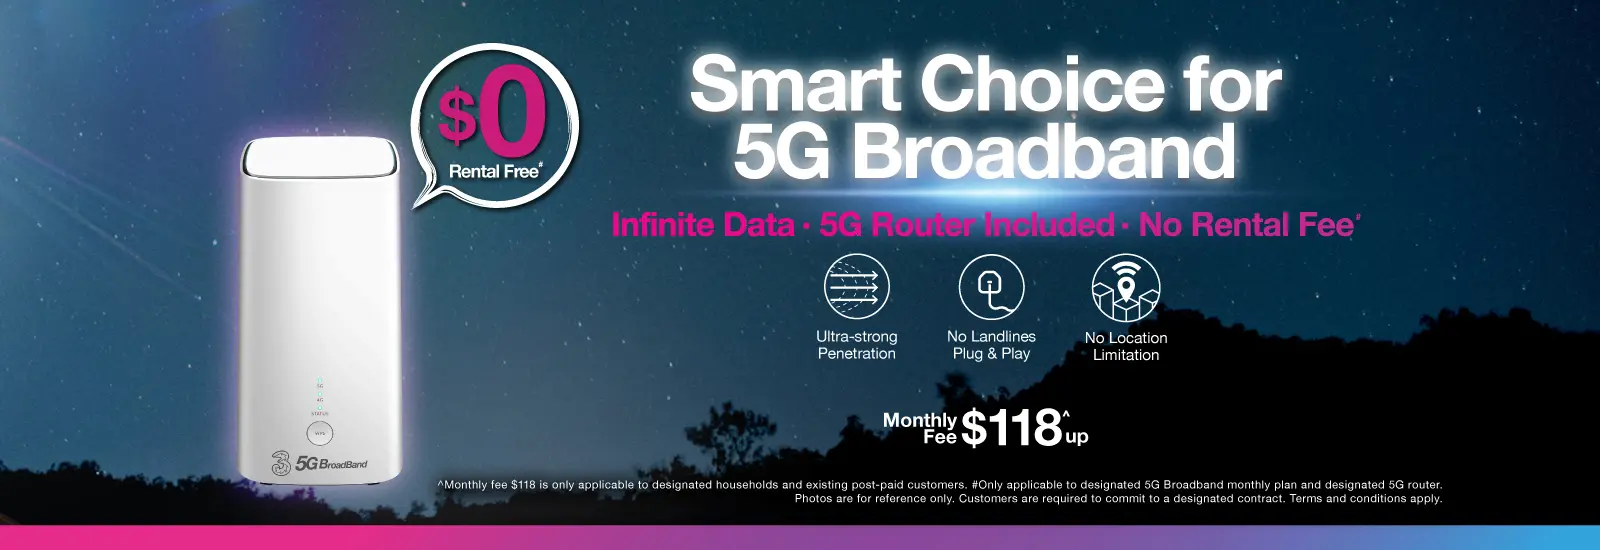 Smart Choice for 5G Boradband! Infinte Data, 5G Router Included, No Rental Fee! As low as $118/month!